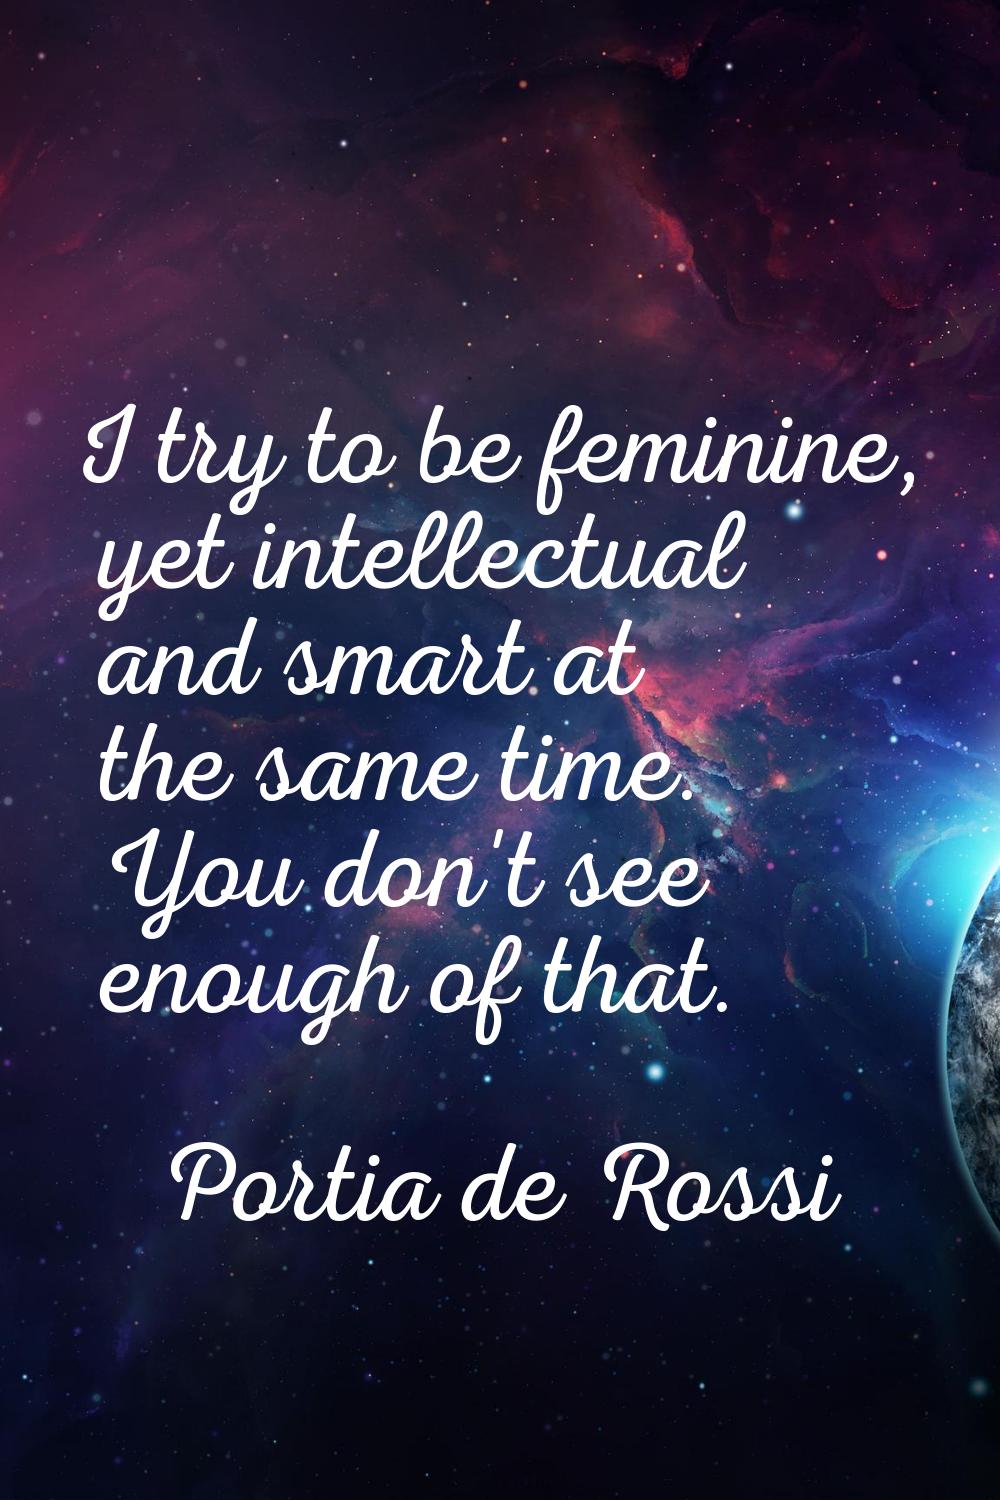 I try to be feminine, yet intellectual and smart at the same time. You don't see enough of that.